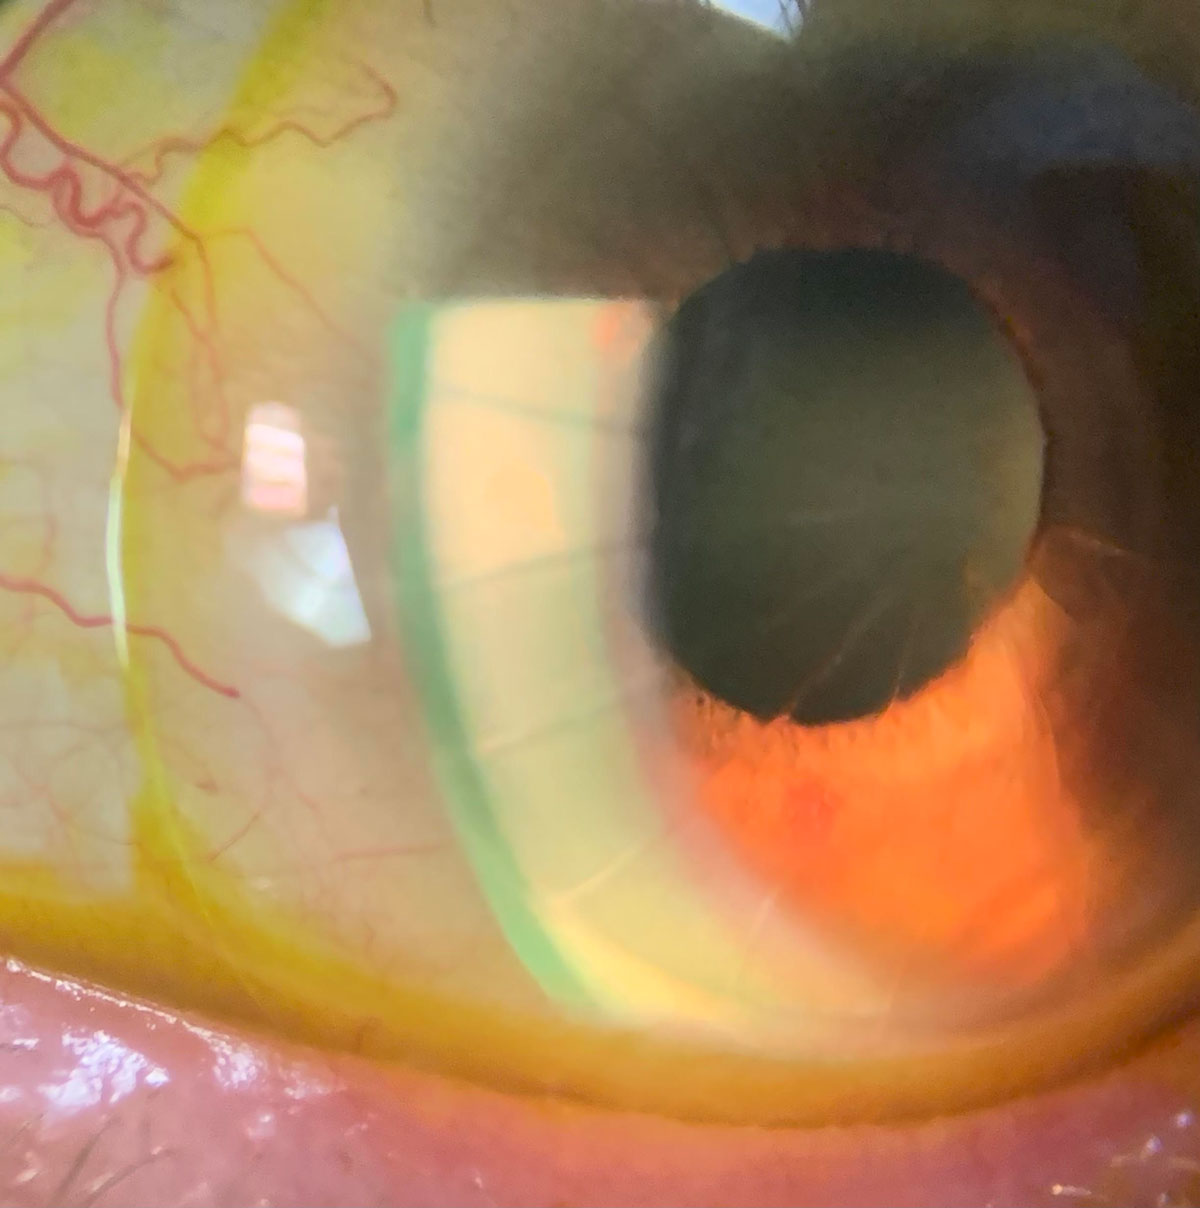 A scleral with sodium fluorescein on an eye with radial keratectomy, Acanthamoeba keratitis and neovascularization.